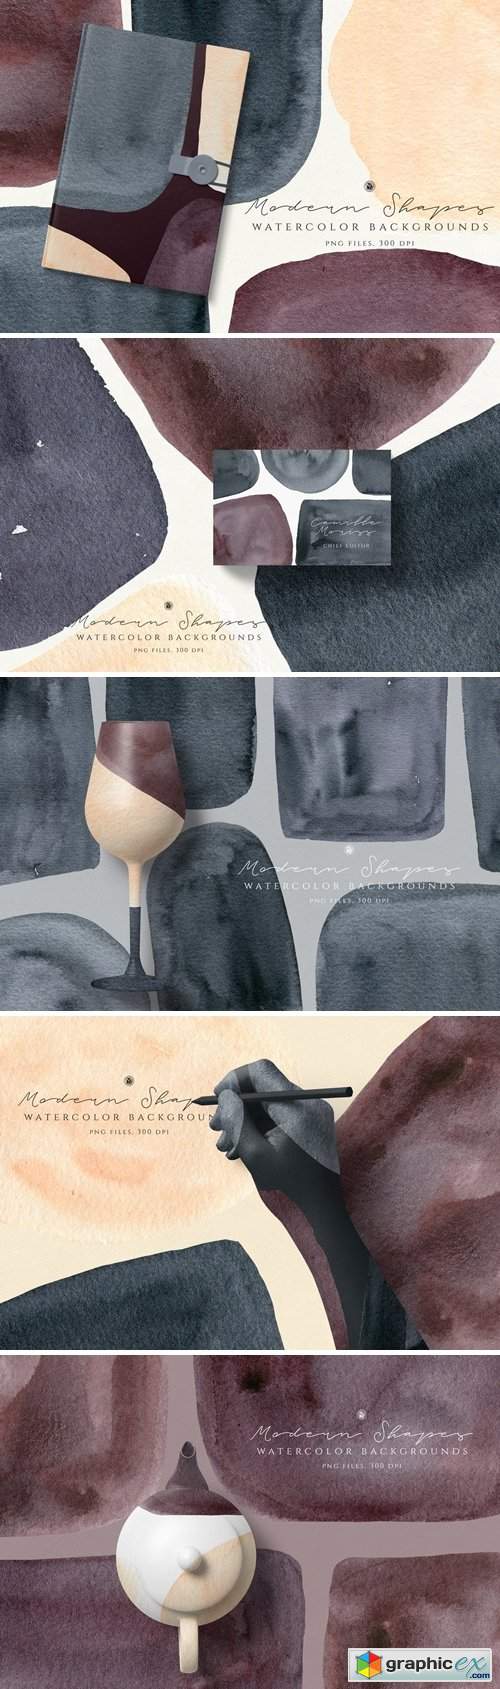 Watercolor Backgrounds Modern Shapes